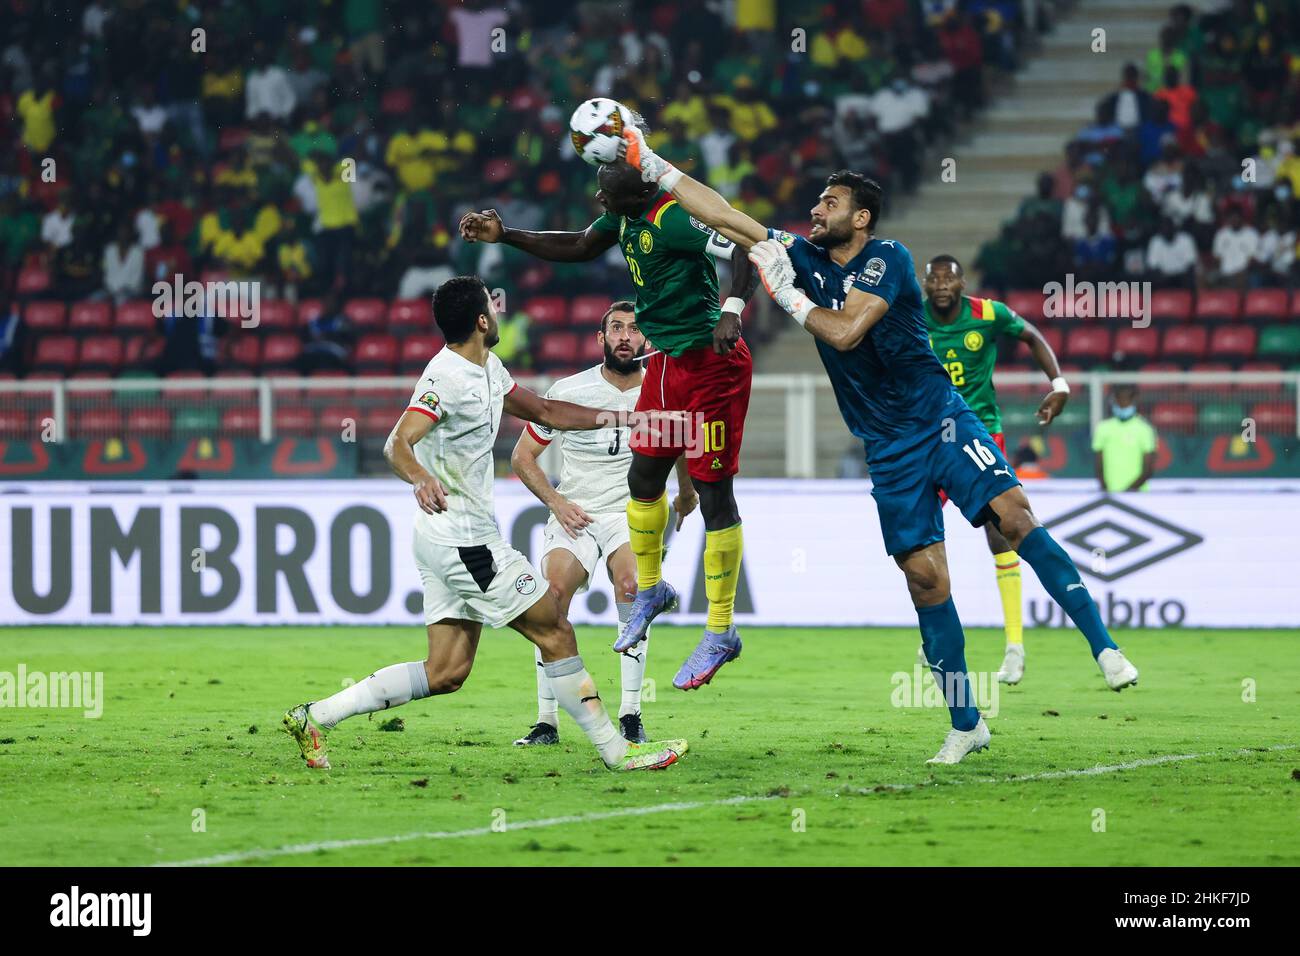 CAMEROON, Yaounde, 03 February 2022 - Gabaski of Egypt and Vincent Aboubakar of Cameroon in action during the Africa Cup of Nations play offs semi final match between Cameroon and Egypt at Stade d'Olembe, Yaounde, Cameroon, 03/02/2022/ Photo by SF Credit: Sebo47/Alamy Live News Stock Photo